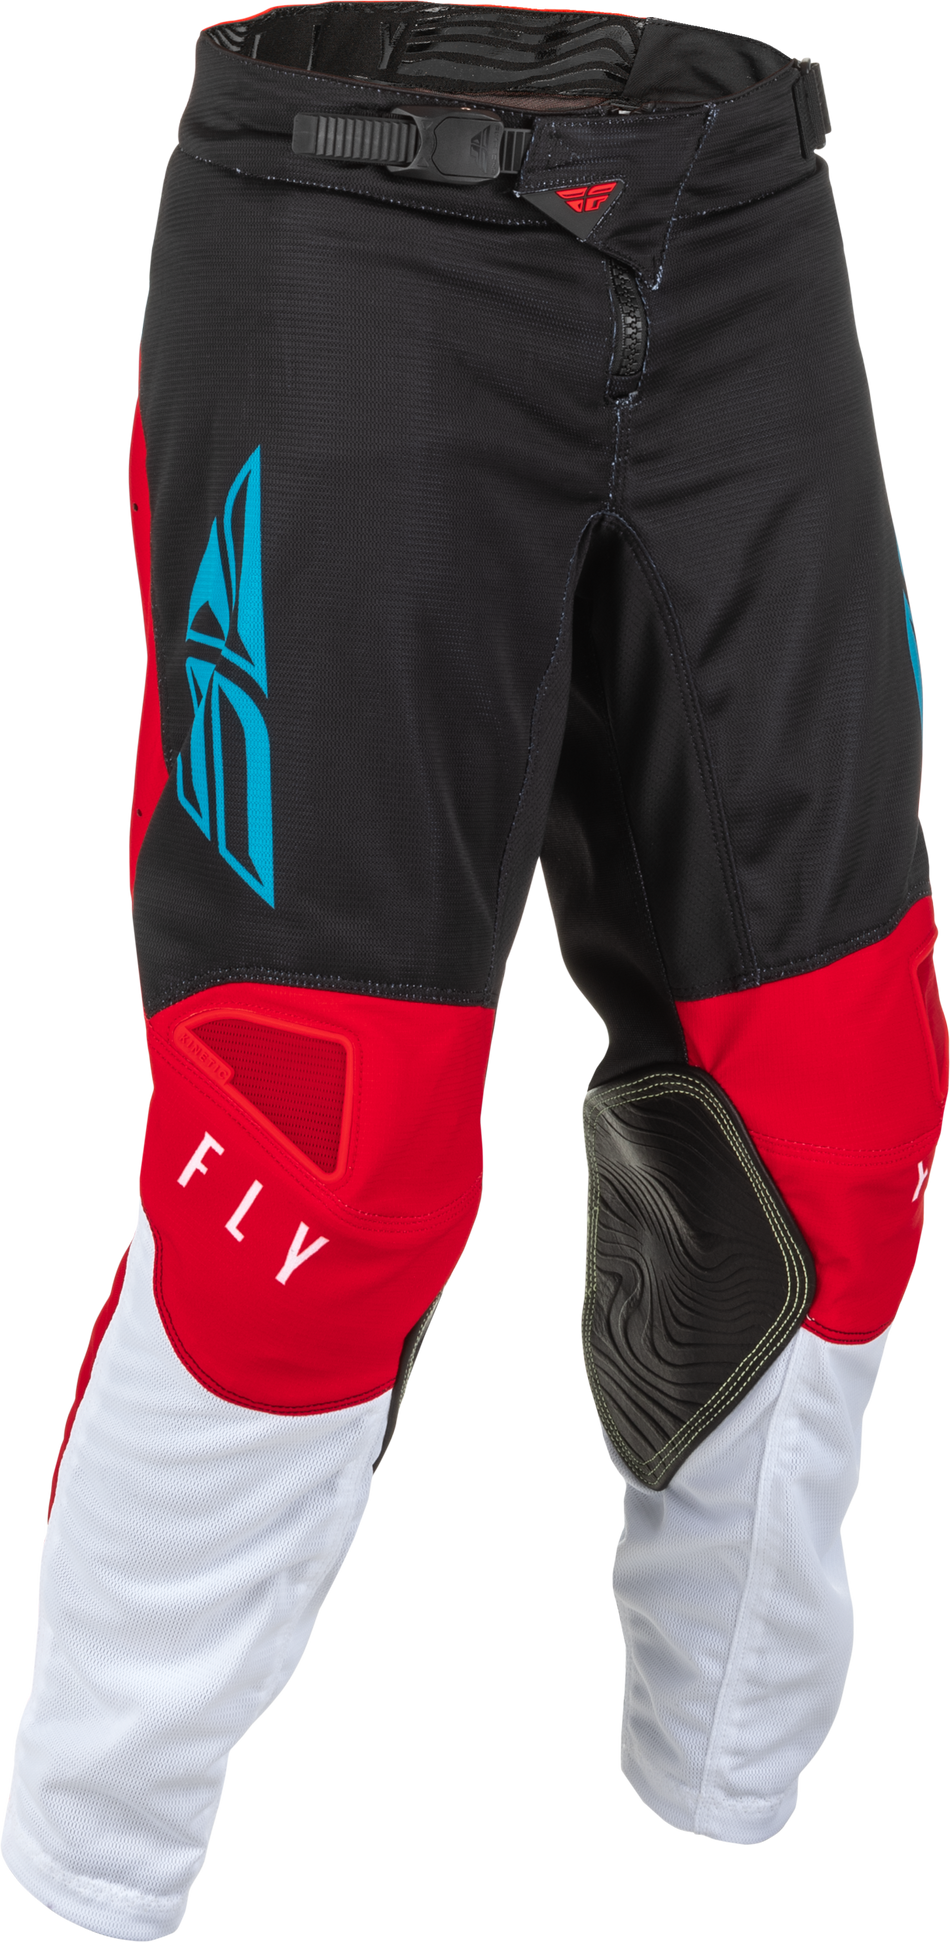 FLY RACING Youth Kinetic Mesh Pants Red/White/Blue Sz 26 375-32426